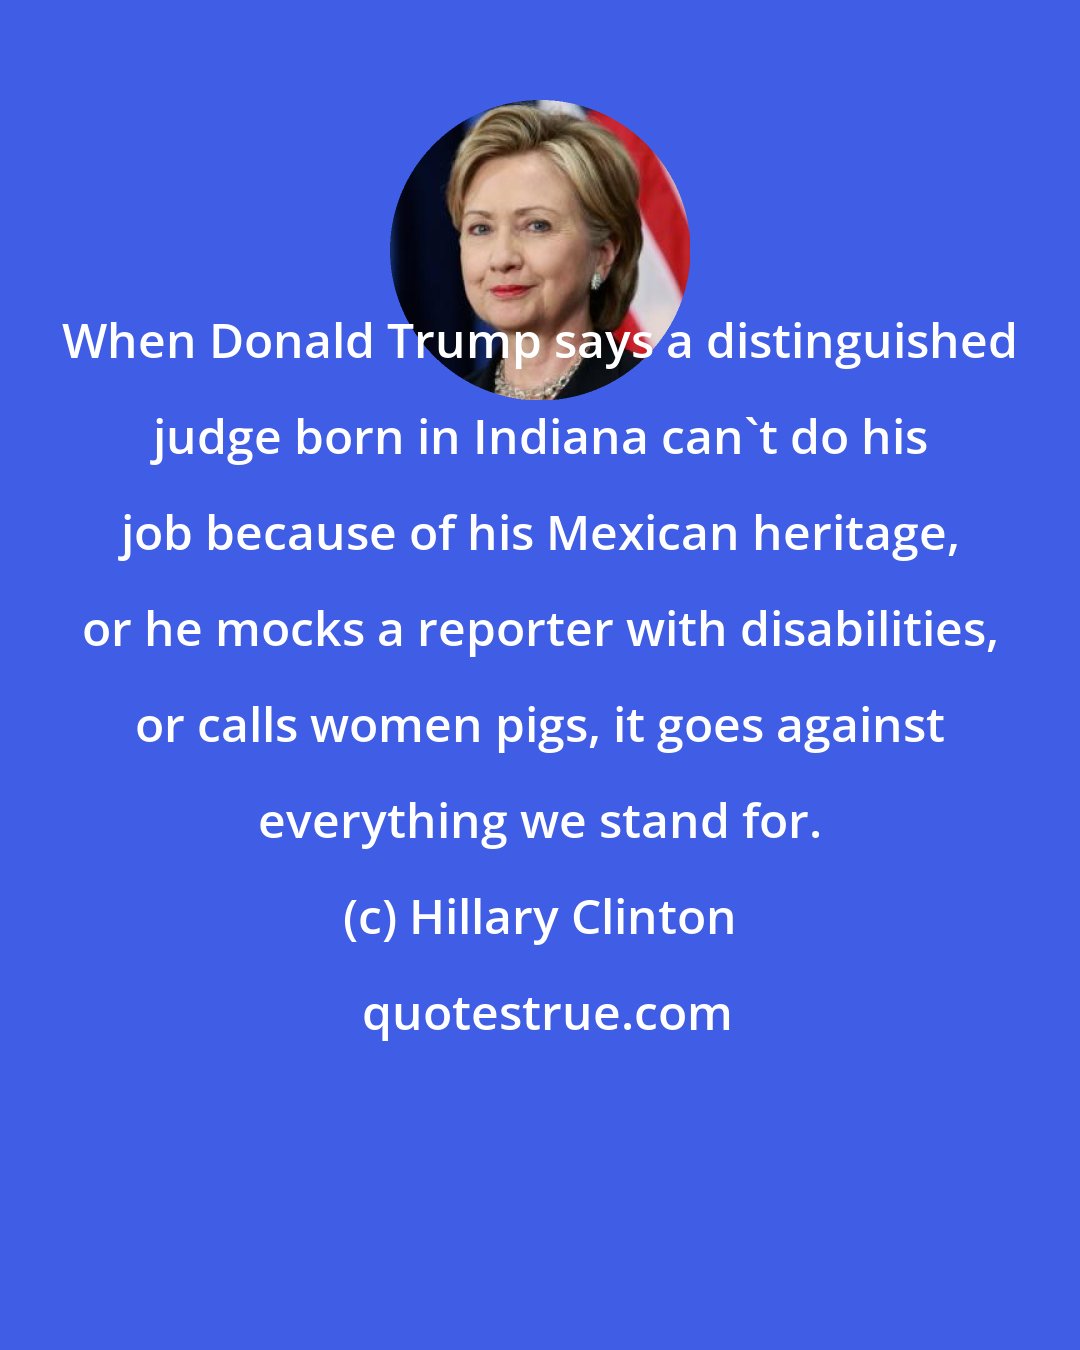 Hillary Clinton: When Donald Trump says a distinguished judge born in Indiana can't do his job because of his Mexican heritage, or he mocks a reporter with disabilities, or calls women pigs, it goes against everything we stand for.